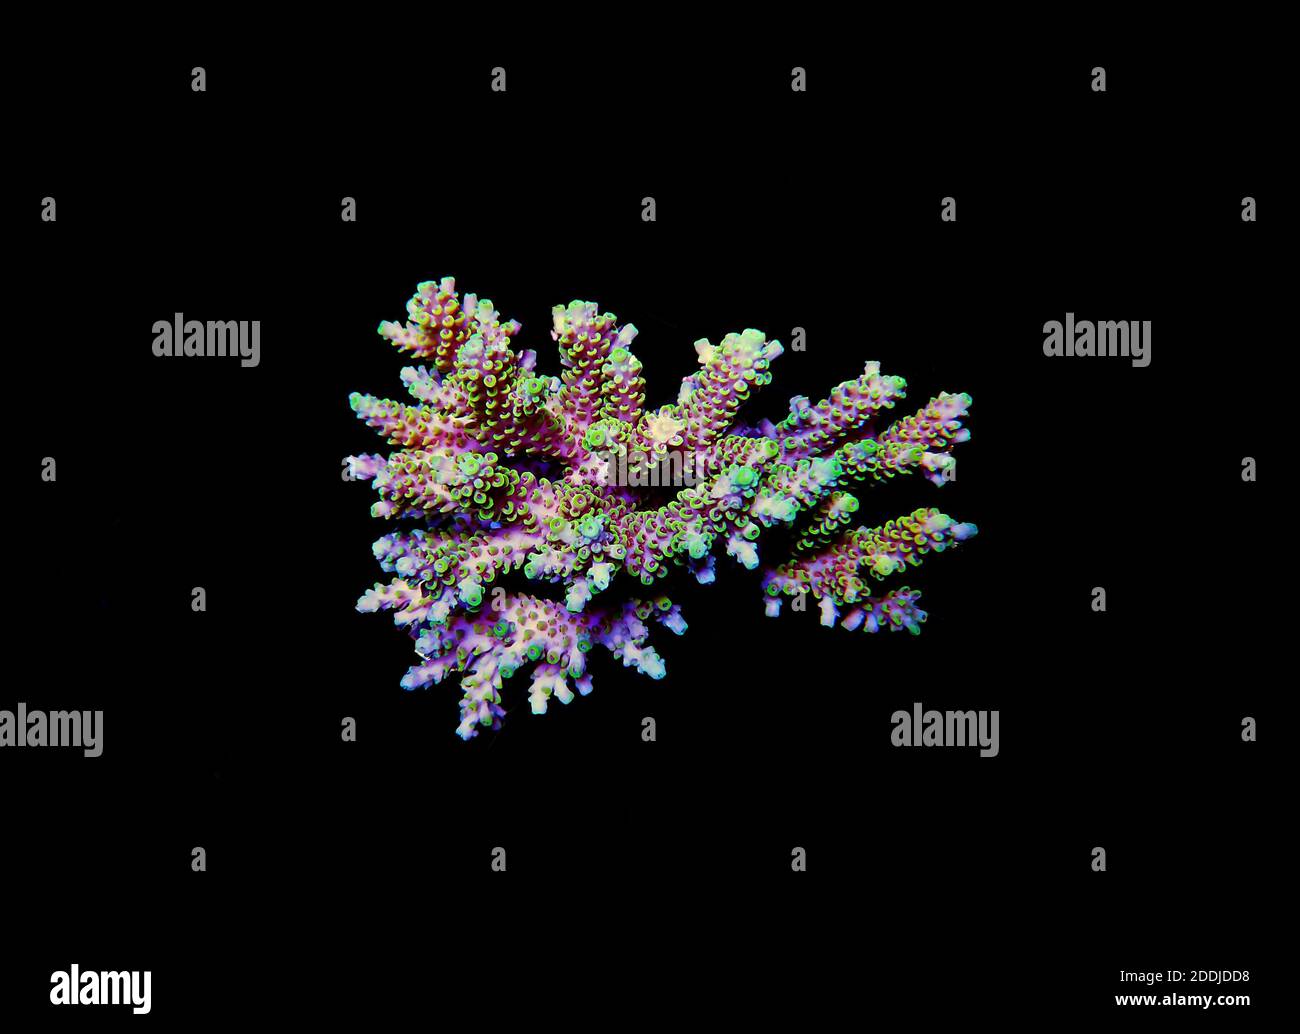 Isolated image of Acropora coral. Acropora is a genus of small polyp ...